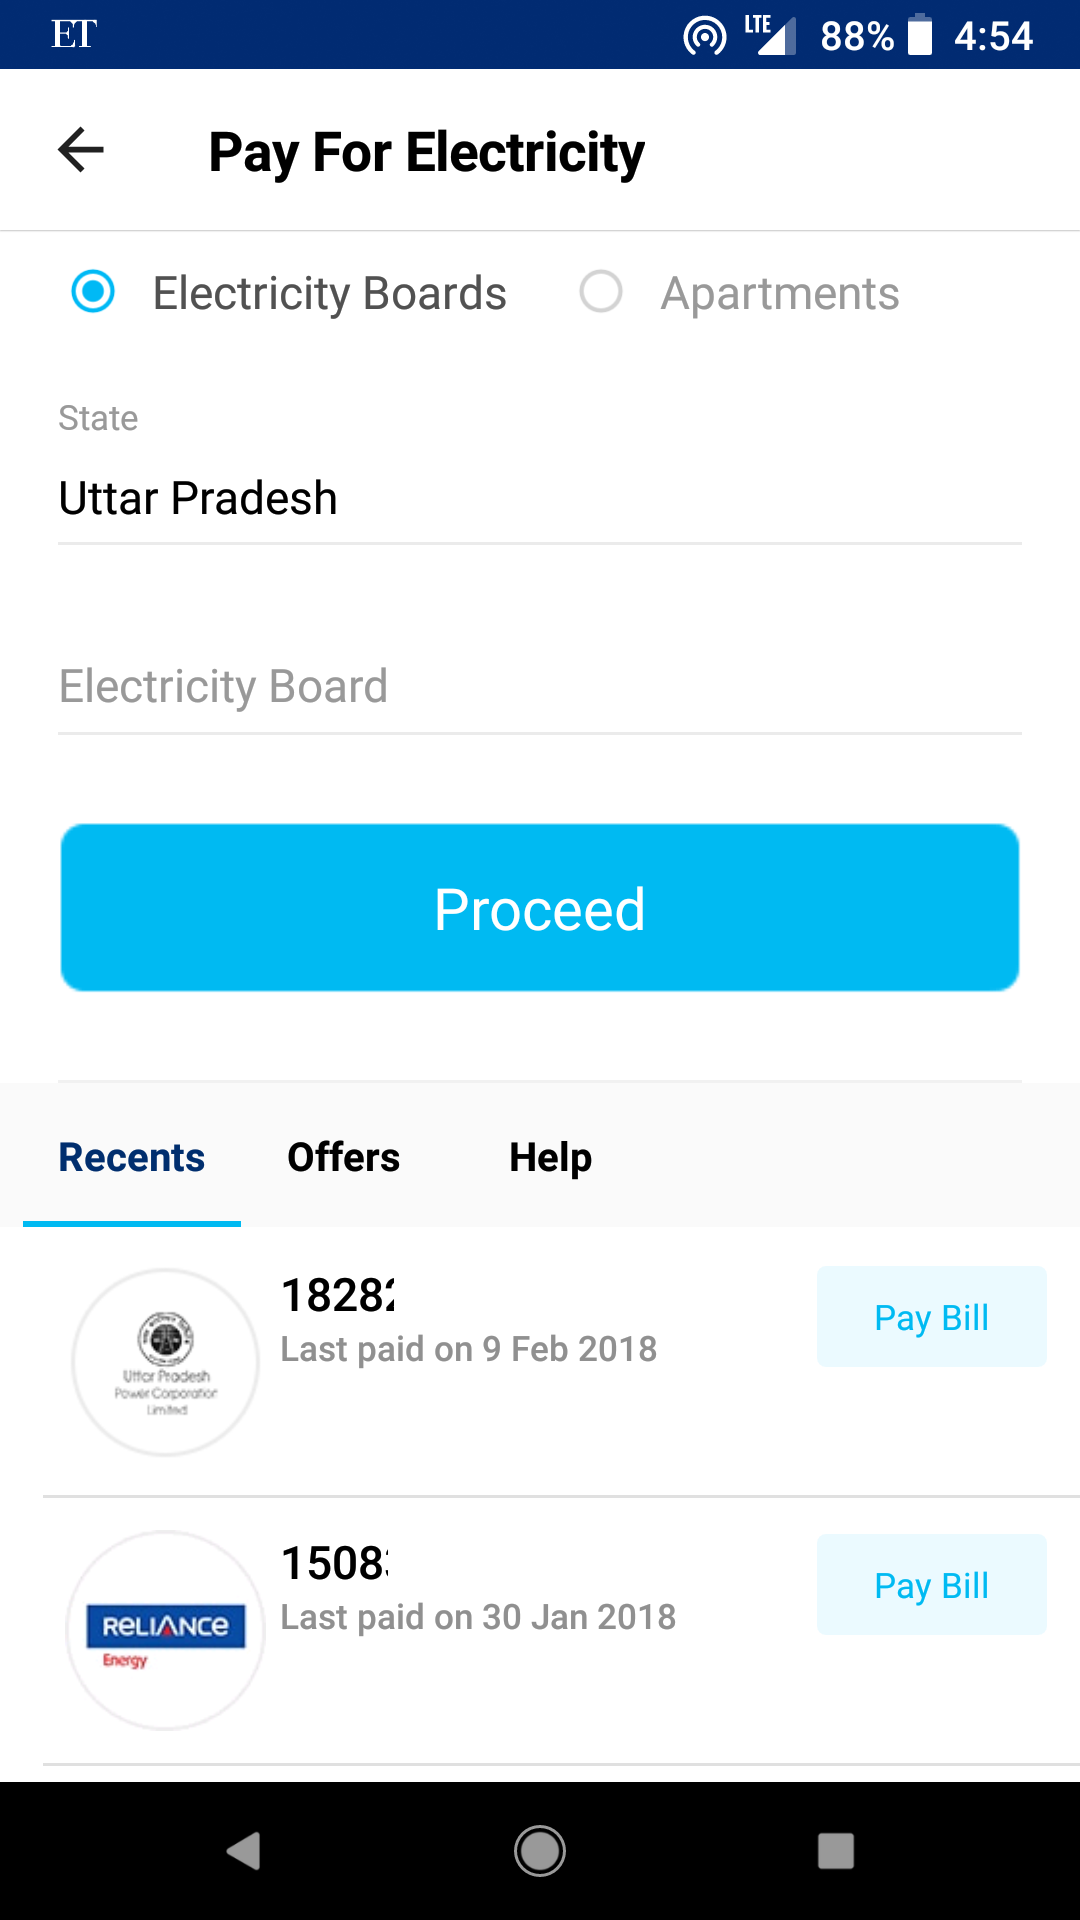 Why I use Paytm for all bill payments except Airtel